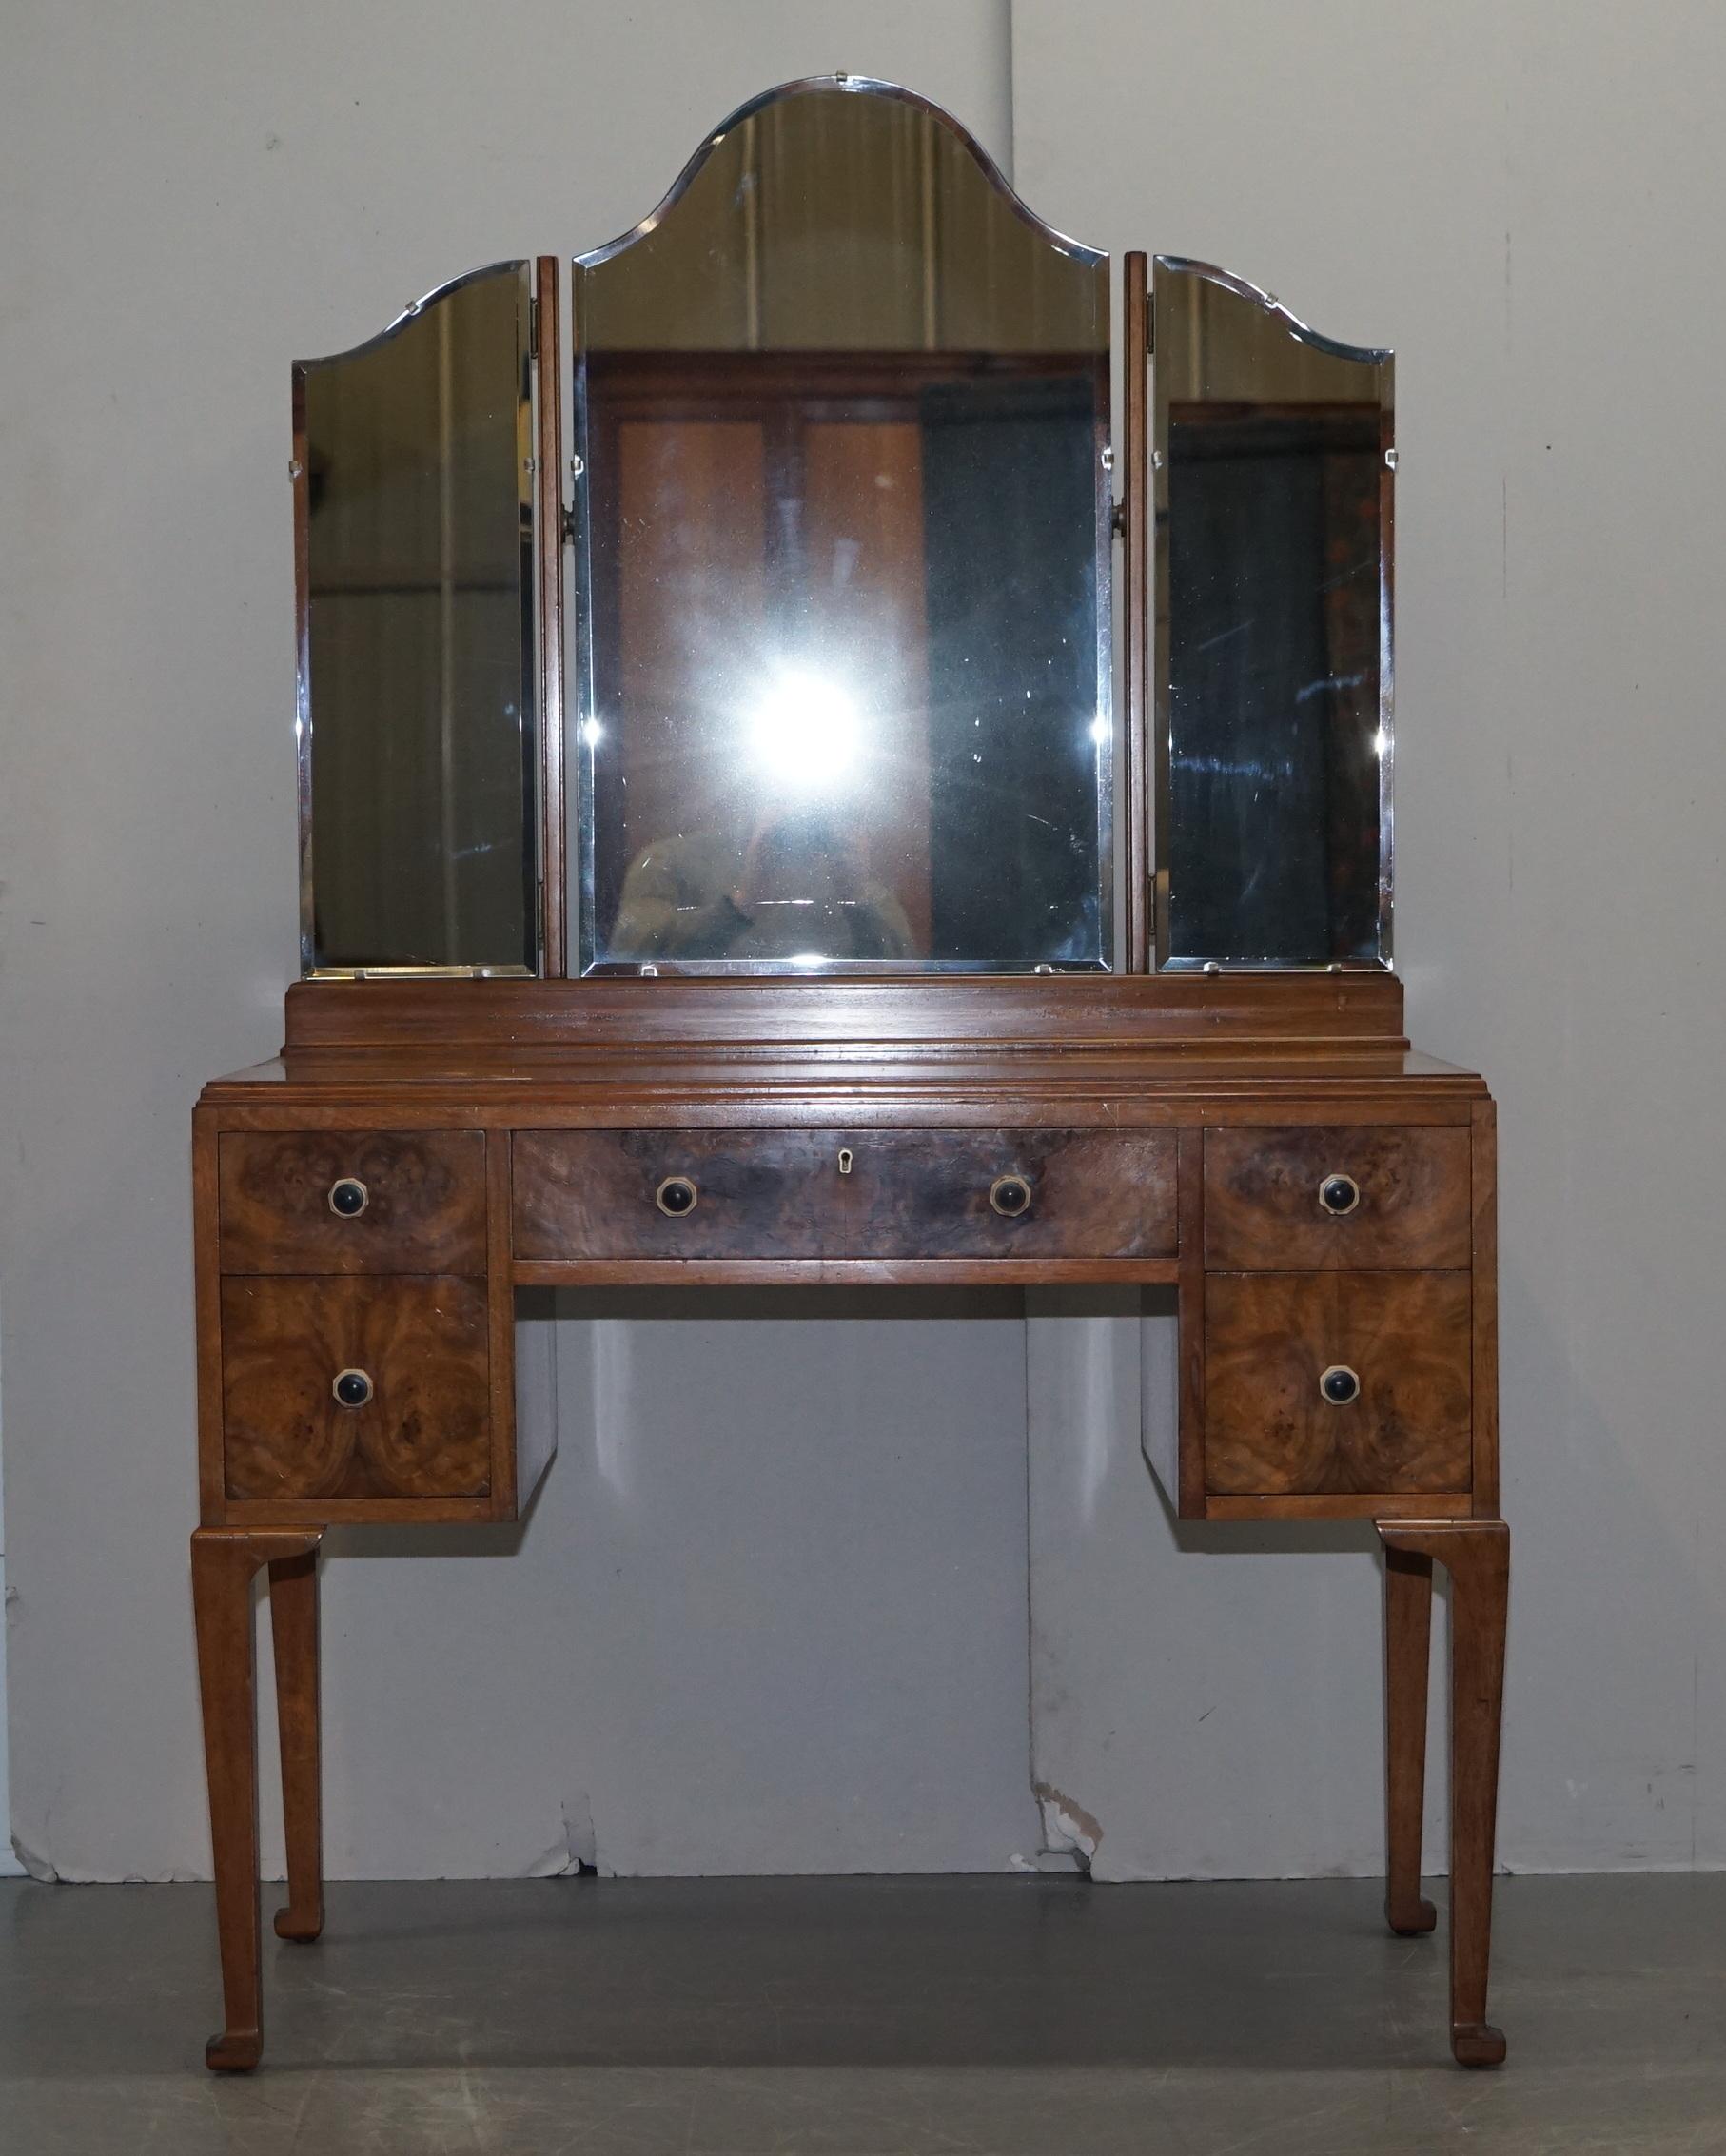 We are delighted to offer for sale this stunning circa 1940’s Burr & Burl Walnut dressing table and stool with Tri-folding mirrors

This is part of a suite, I have the matching wardrobe and beds listed under my other items 

This dressing really is